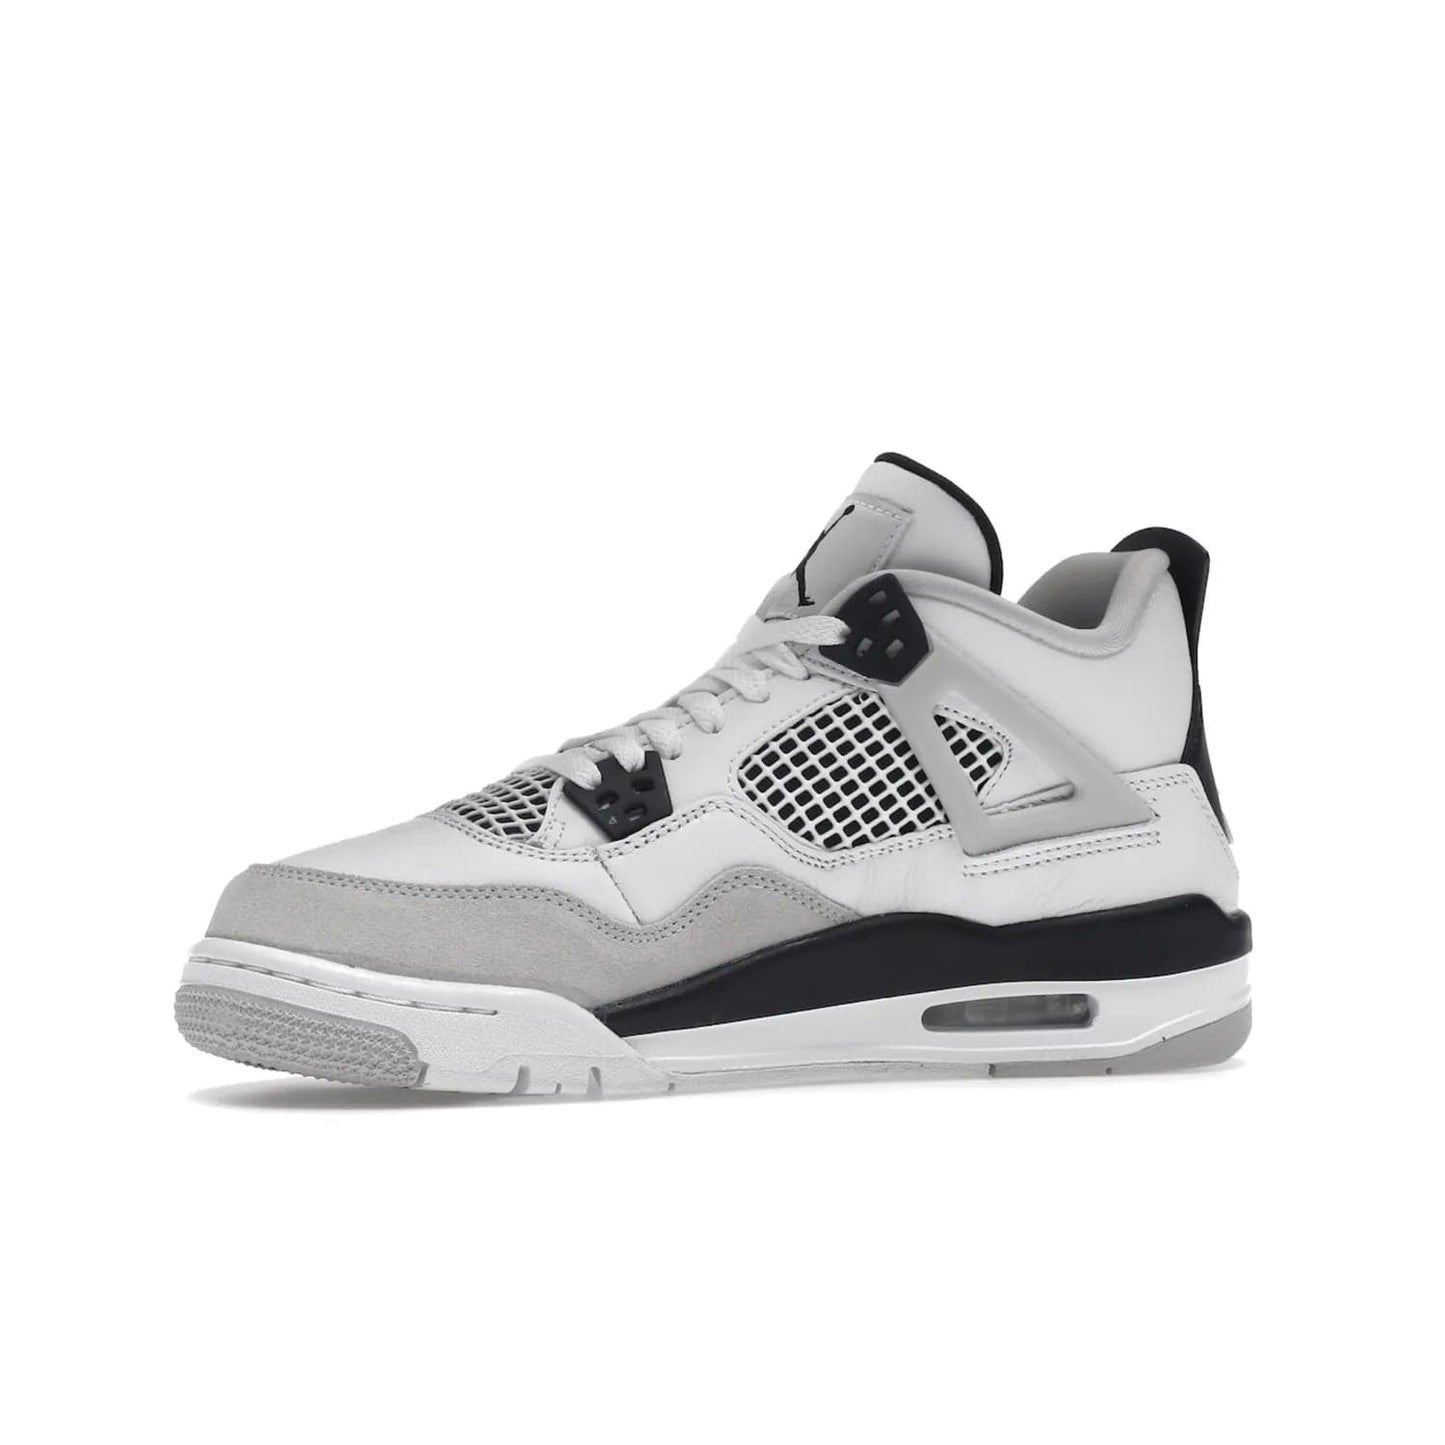 Jordan 4 Retro Military Black (GS) - Image 17 - Only at www.BallersClubKickz.com - A must-have for grade schoolers, the Air Jordan 4 Retro Military Black (GS) offers classic style with plenty of breathable support. Featuring a white sole and base with suede and leather overlays in subtle black and grey tones, the shoes are perfect for active pursuits and everyday comfort. Get an instant classic today!